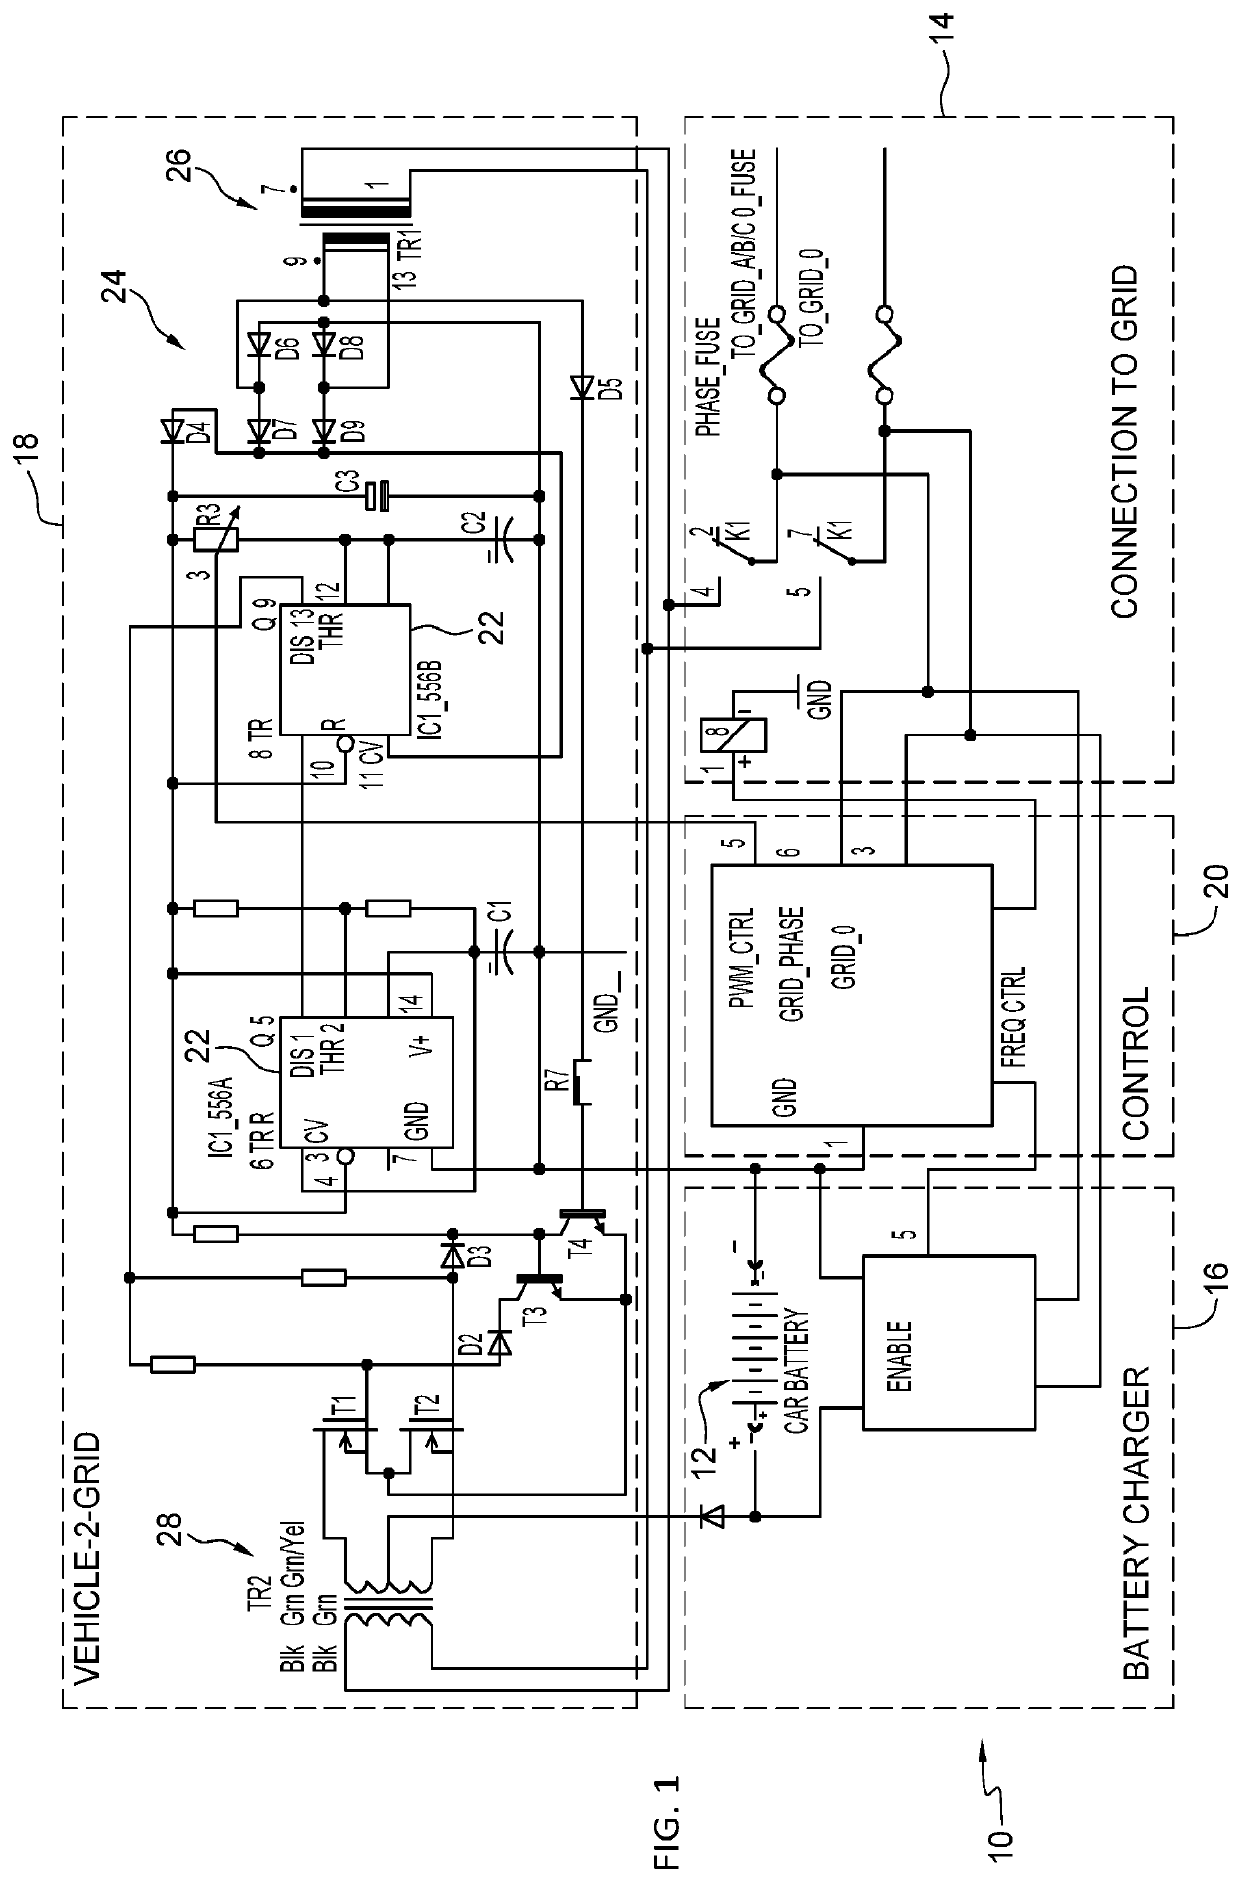 Battery control methods and circuits, and energy storage to grid connection systems